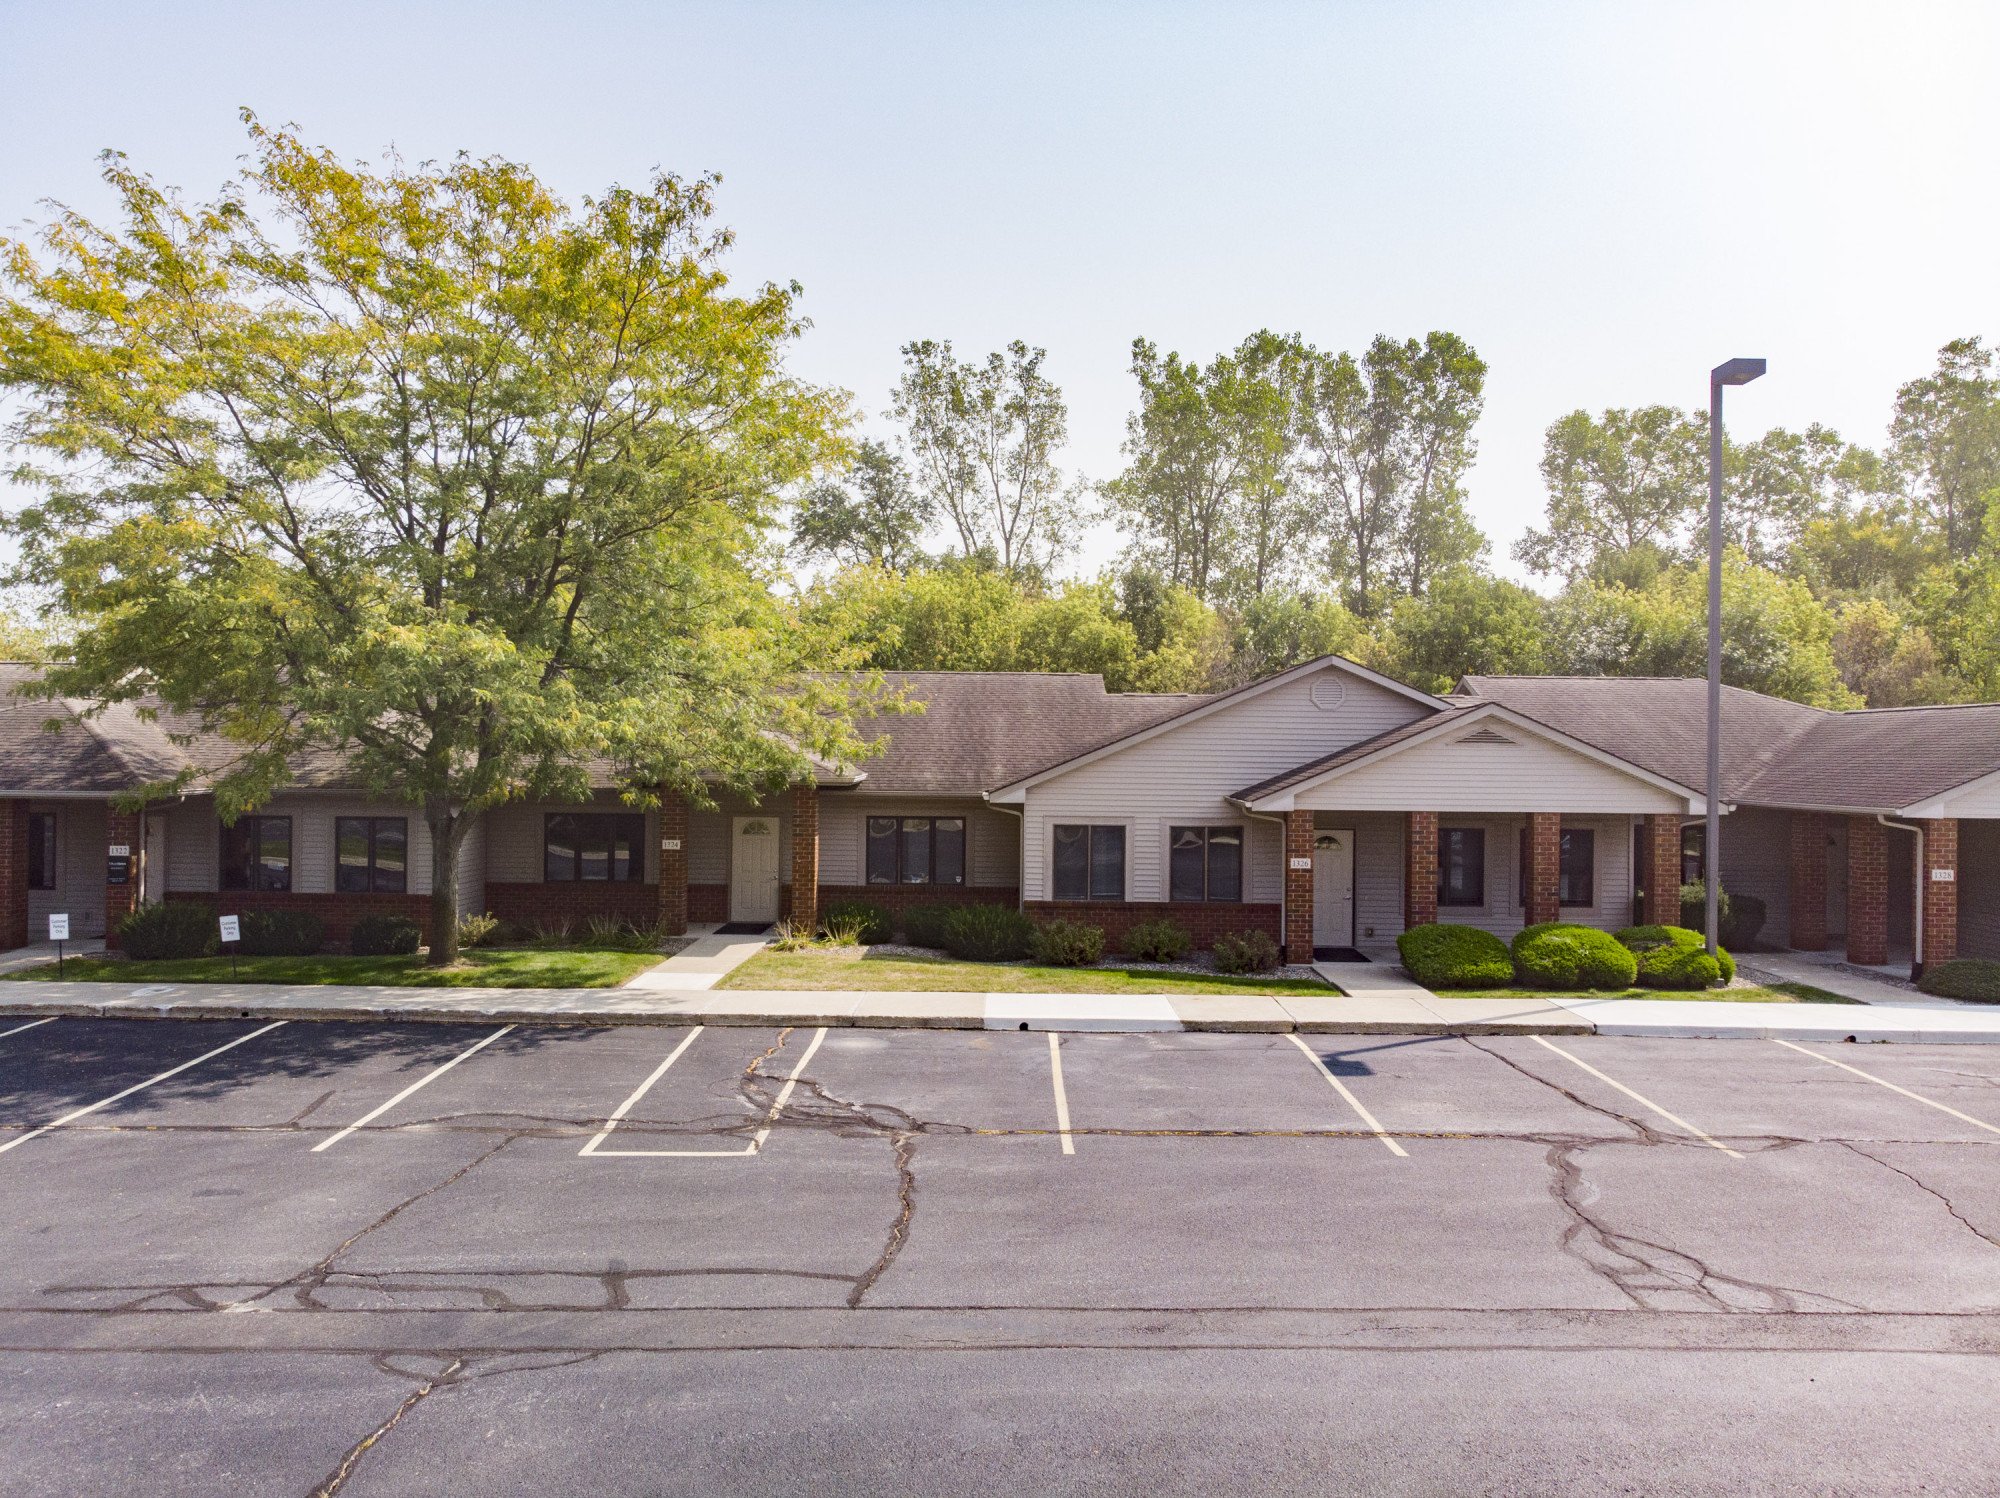 Sturges Property Group - Office space for lease in Auburn Indiana small office